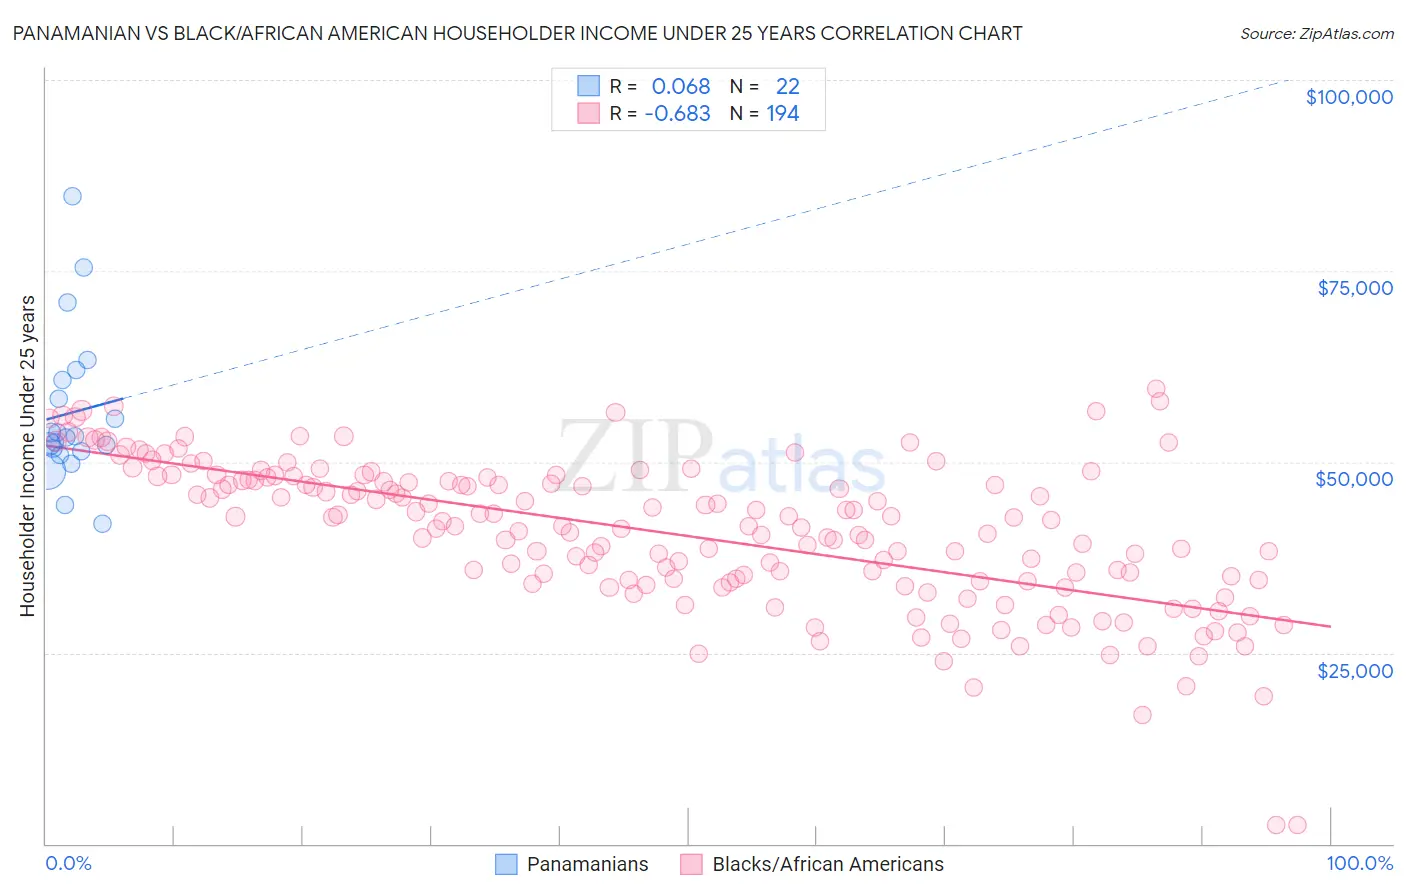 Panamanian vs Black/African American Householder Income Under 25 years